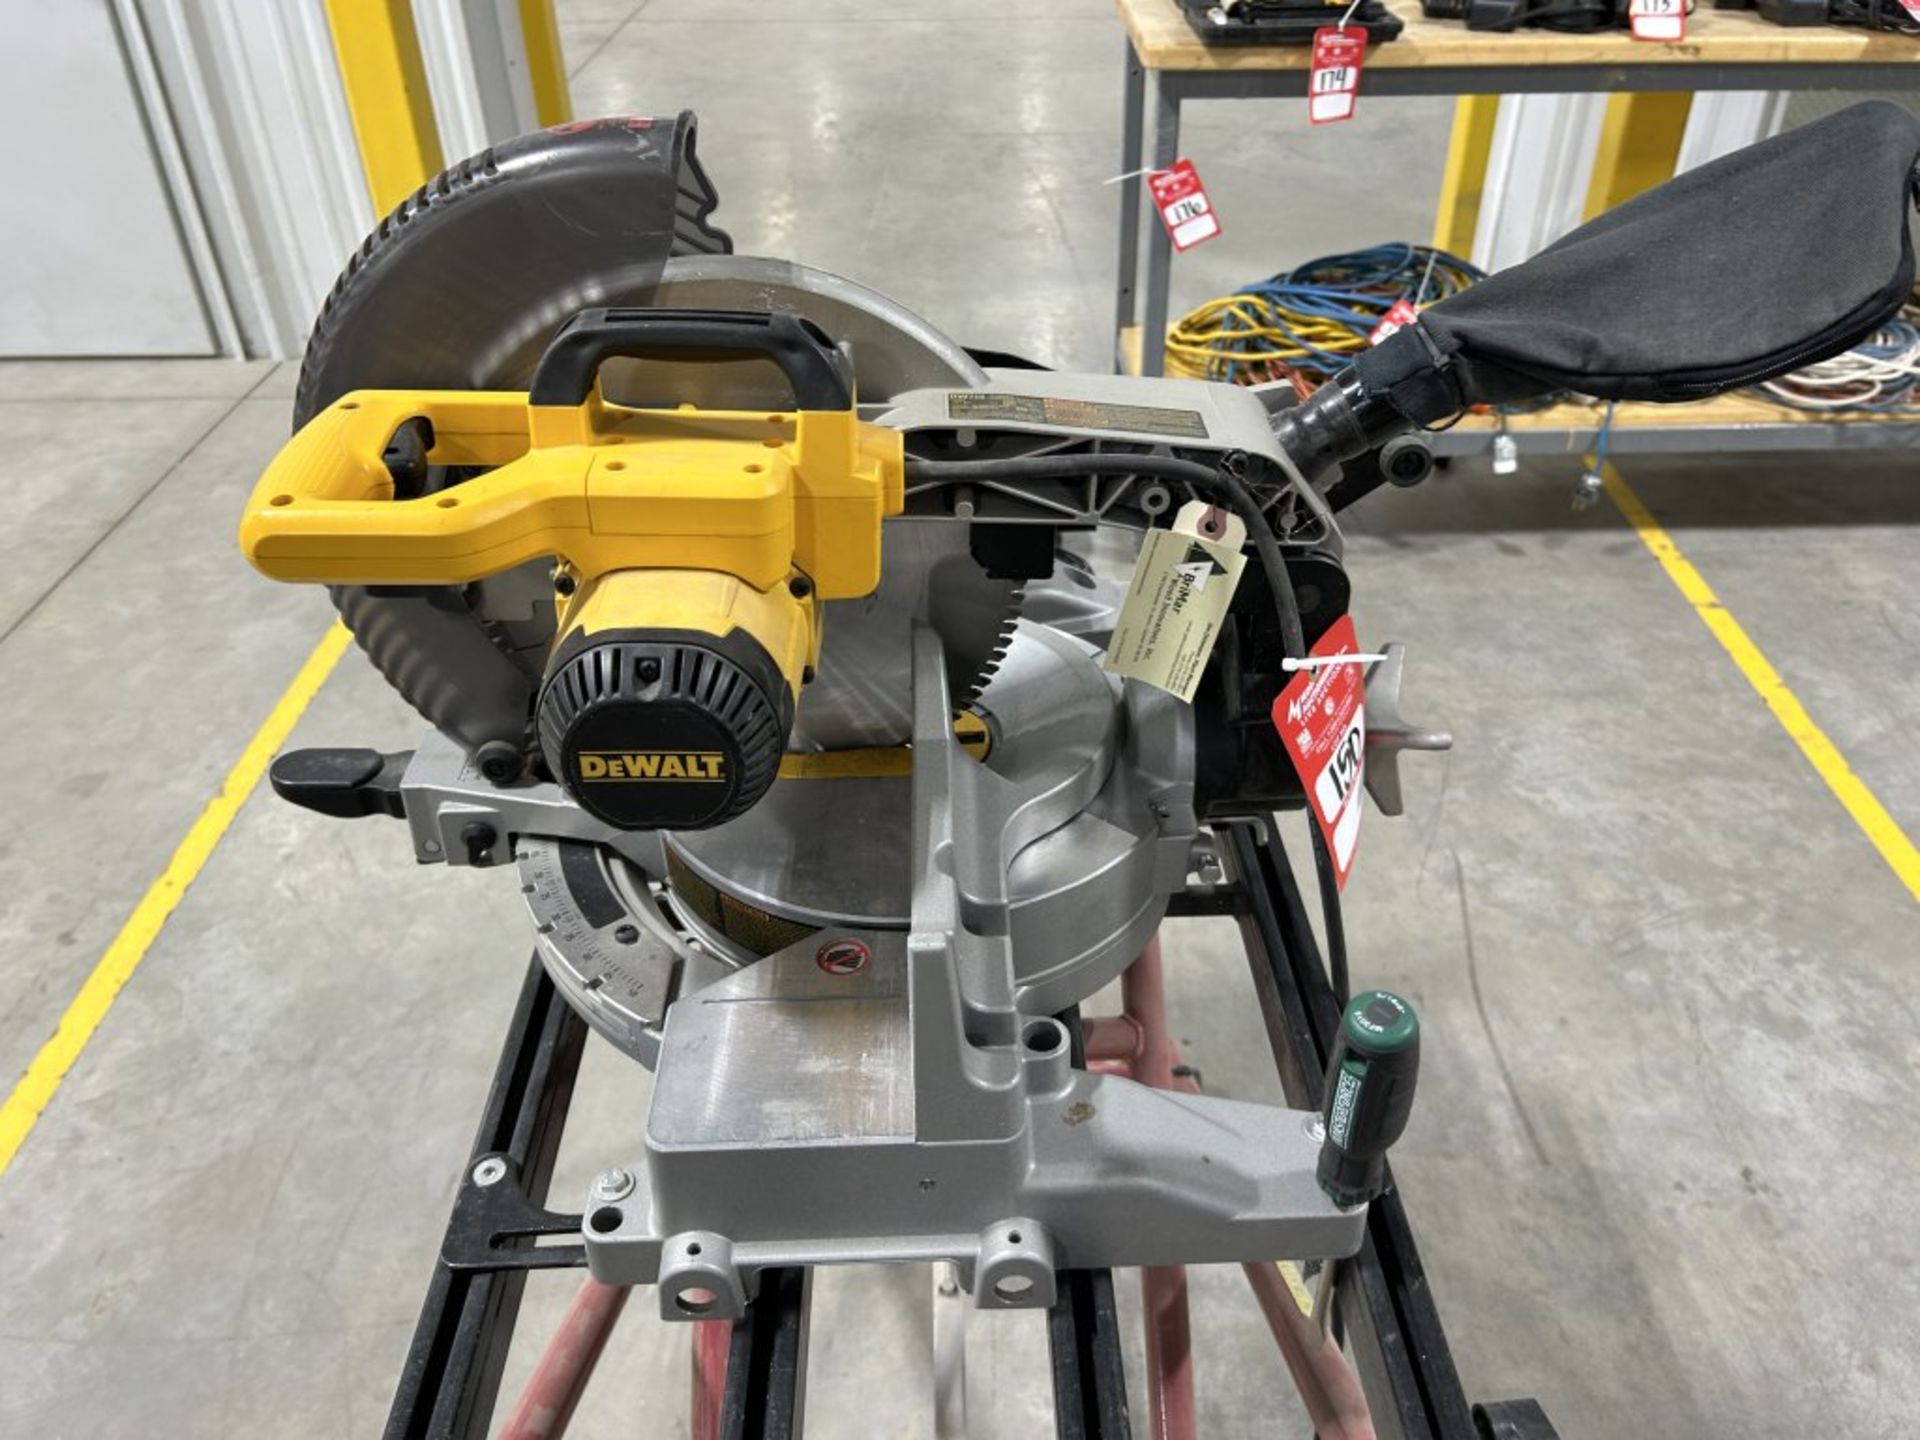 DEWALT DW715 12'' COMPOUND MITER SAW, TYPE 2, 120V, DOUBLE INSULATED, ON COLLAPSIBLE ROLLER STAND, - Image 5 of 9